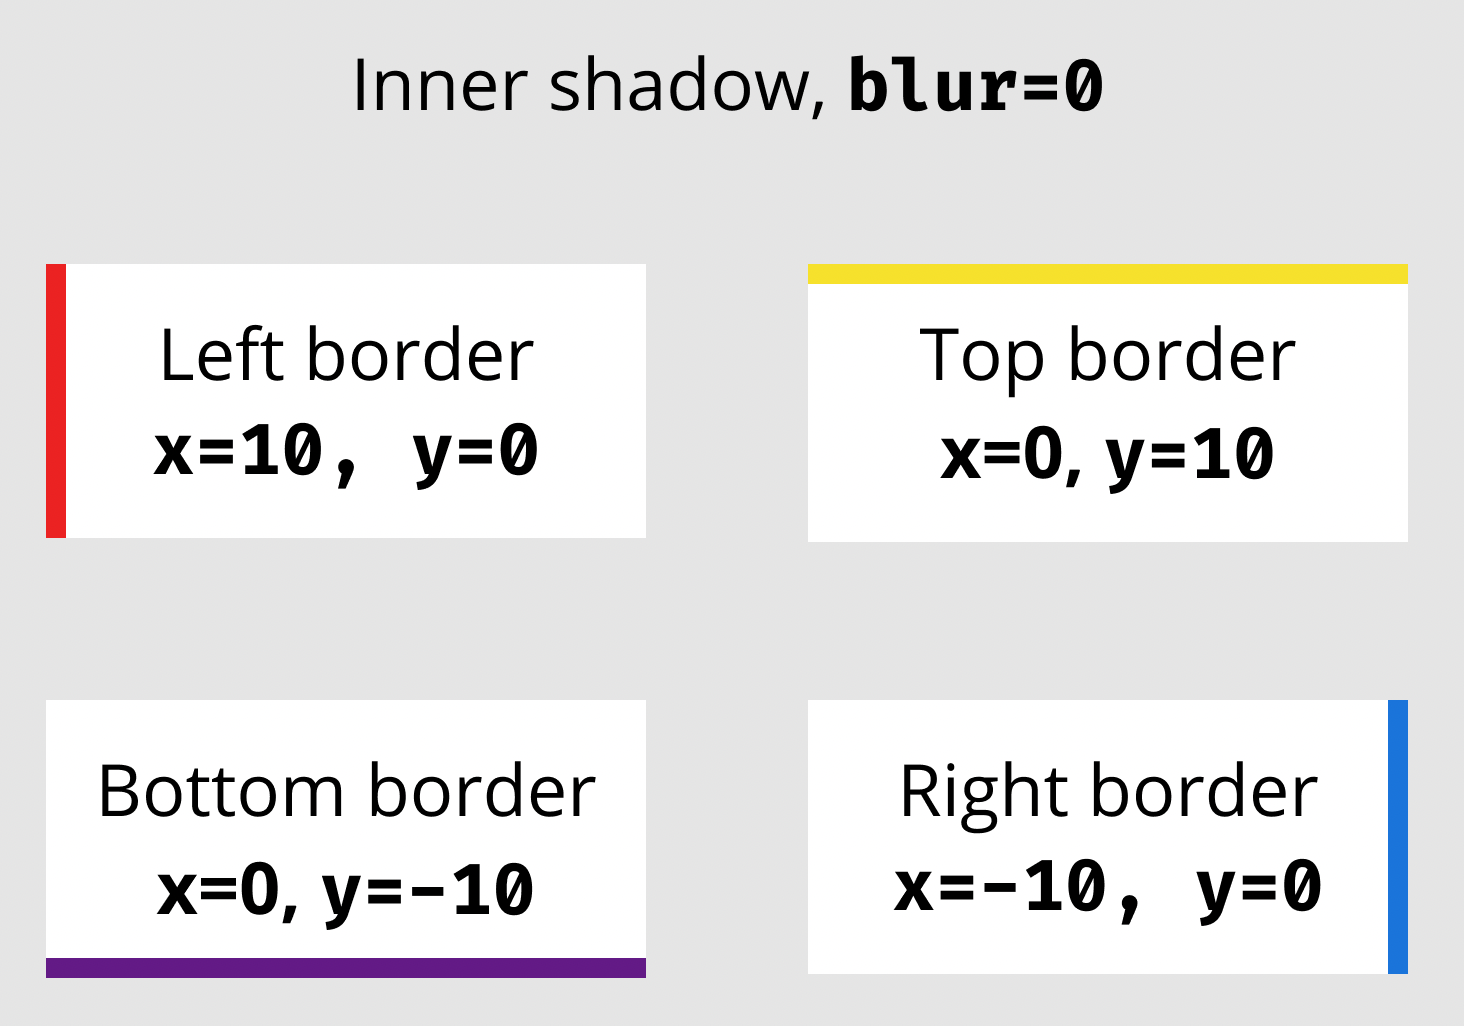 An inner shadow effect on each side of four rectangles